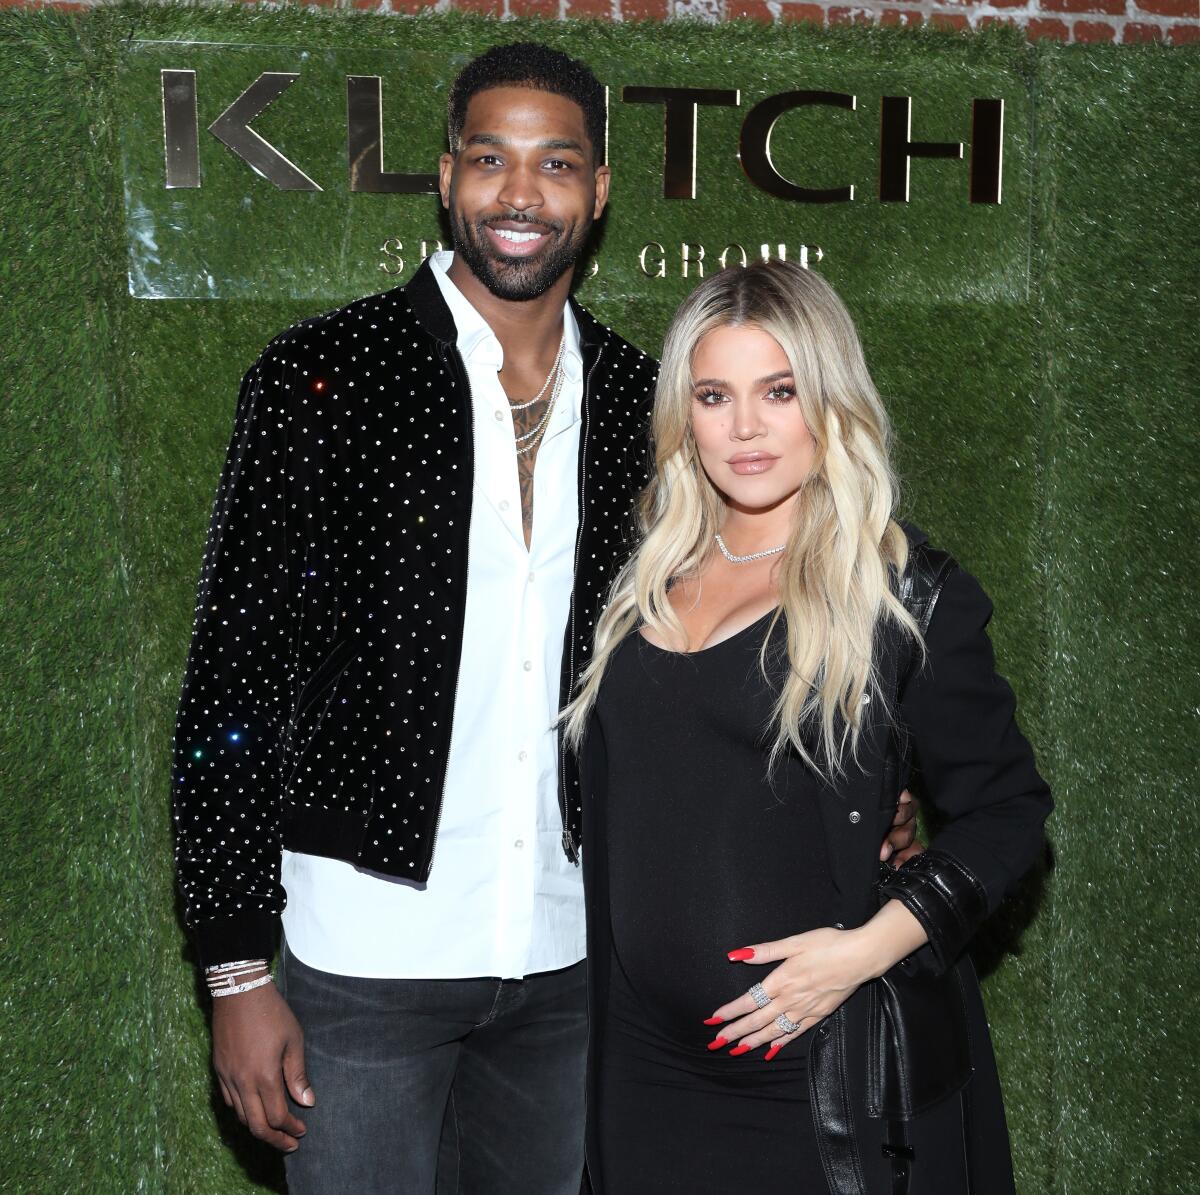 A tall man and a pregnant woman pose together at an event